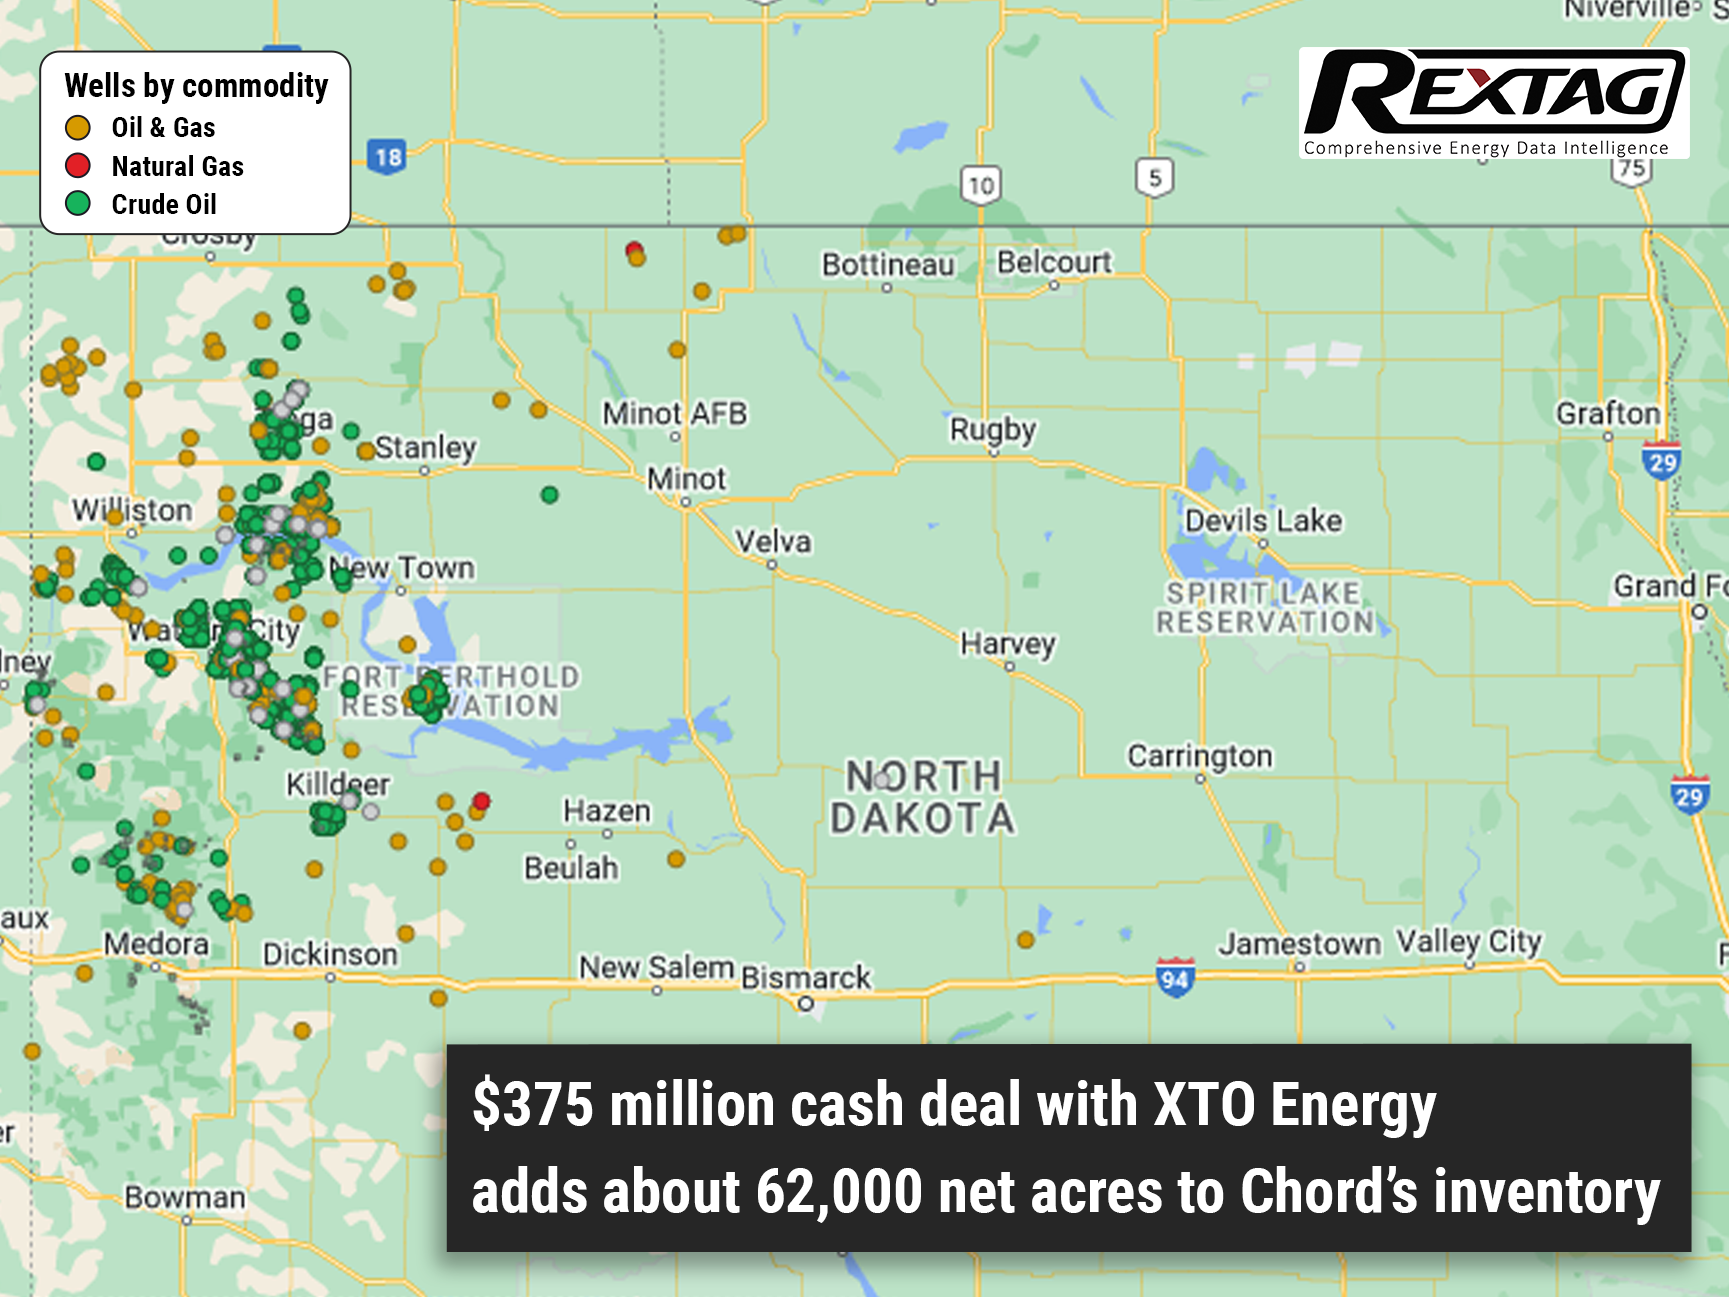 Chord-Energy-Corp-Expands-Williston-Basin-Footprint-with-$375-Million-Acquisition-from-Exxon-Mobil